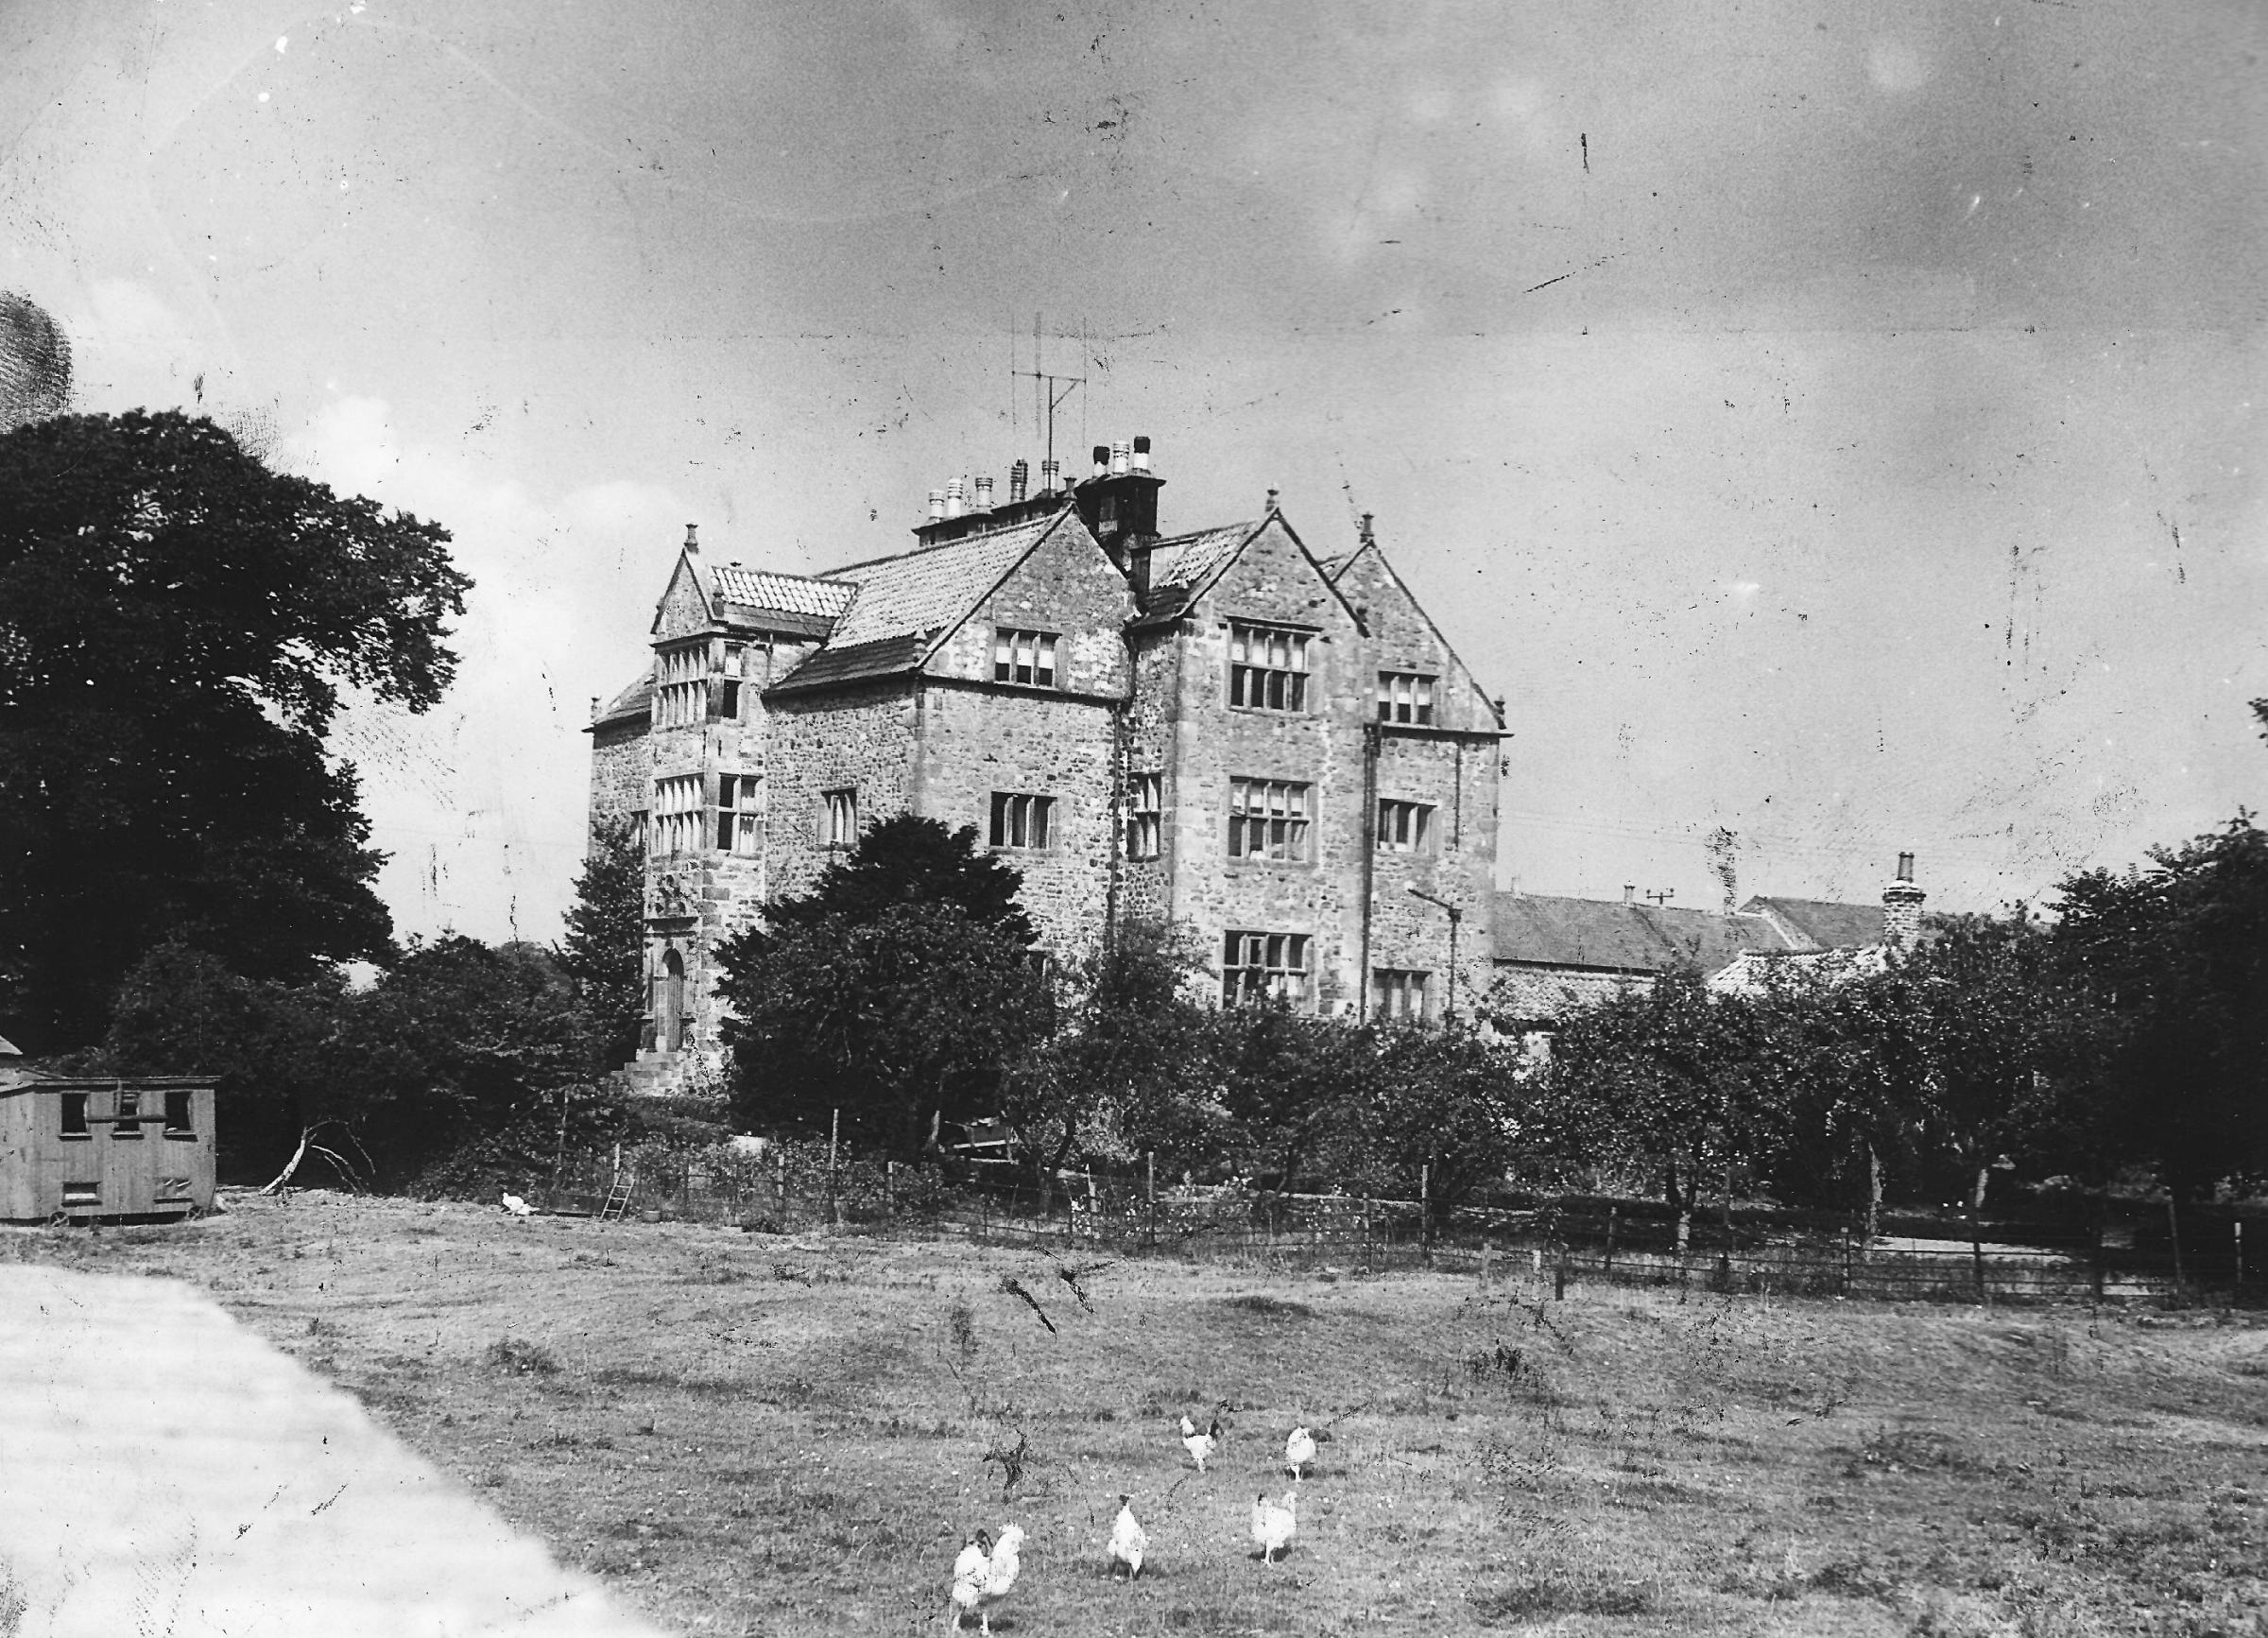 Gainford Hall in August 1955 - it hasnt changed much since then